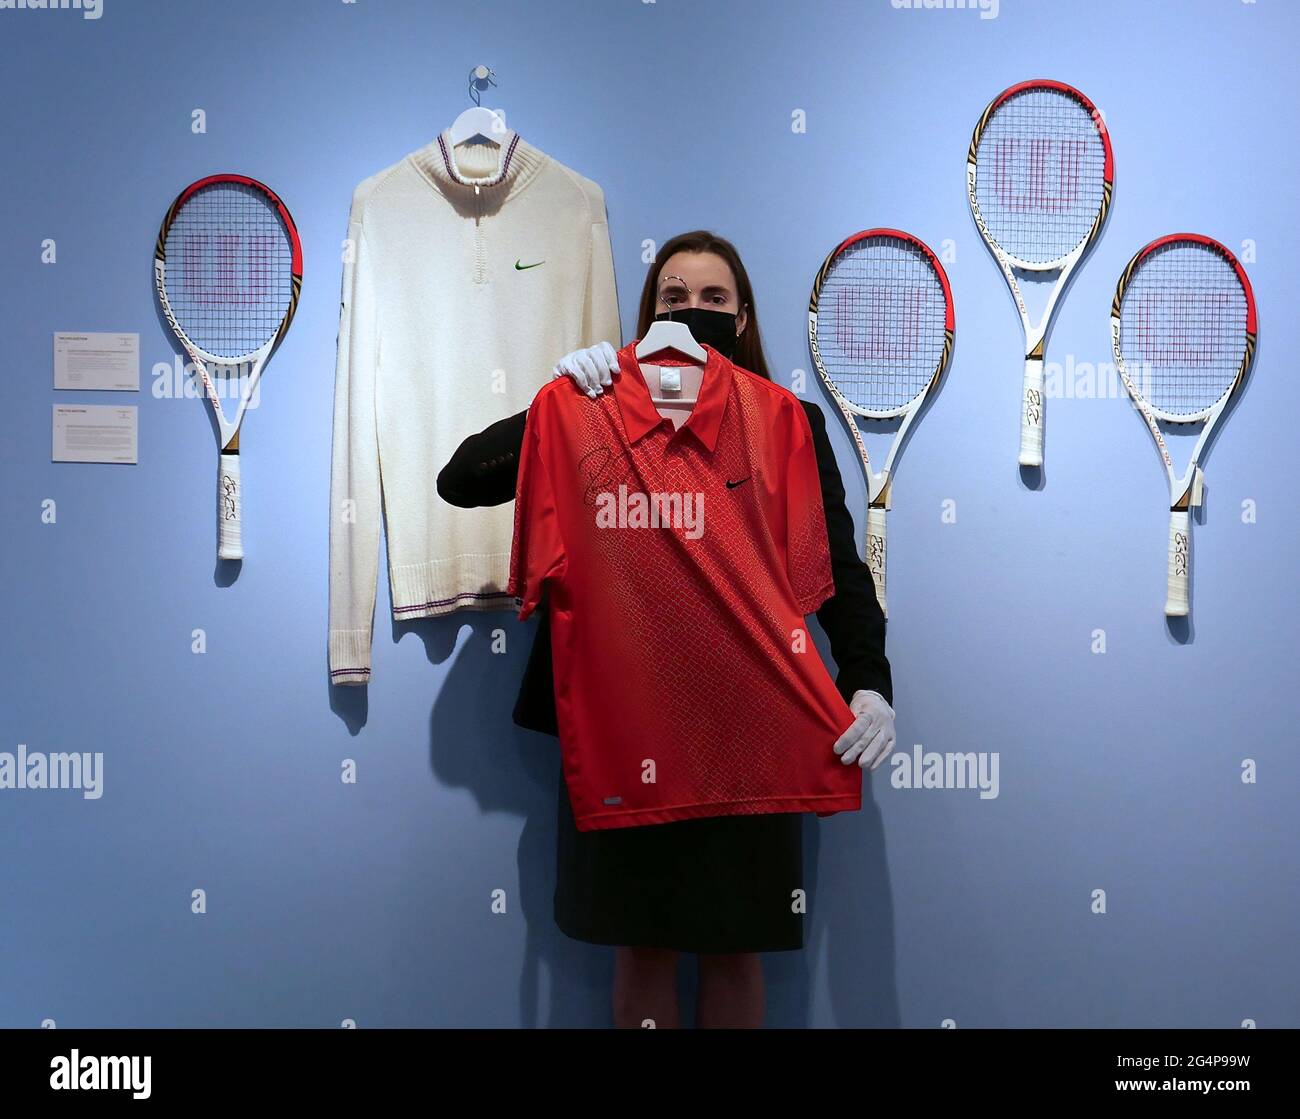 Own a Momentous Object from the Journey of Tennis Greatest Icon